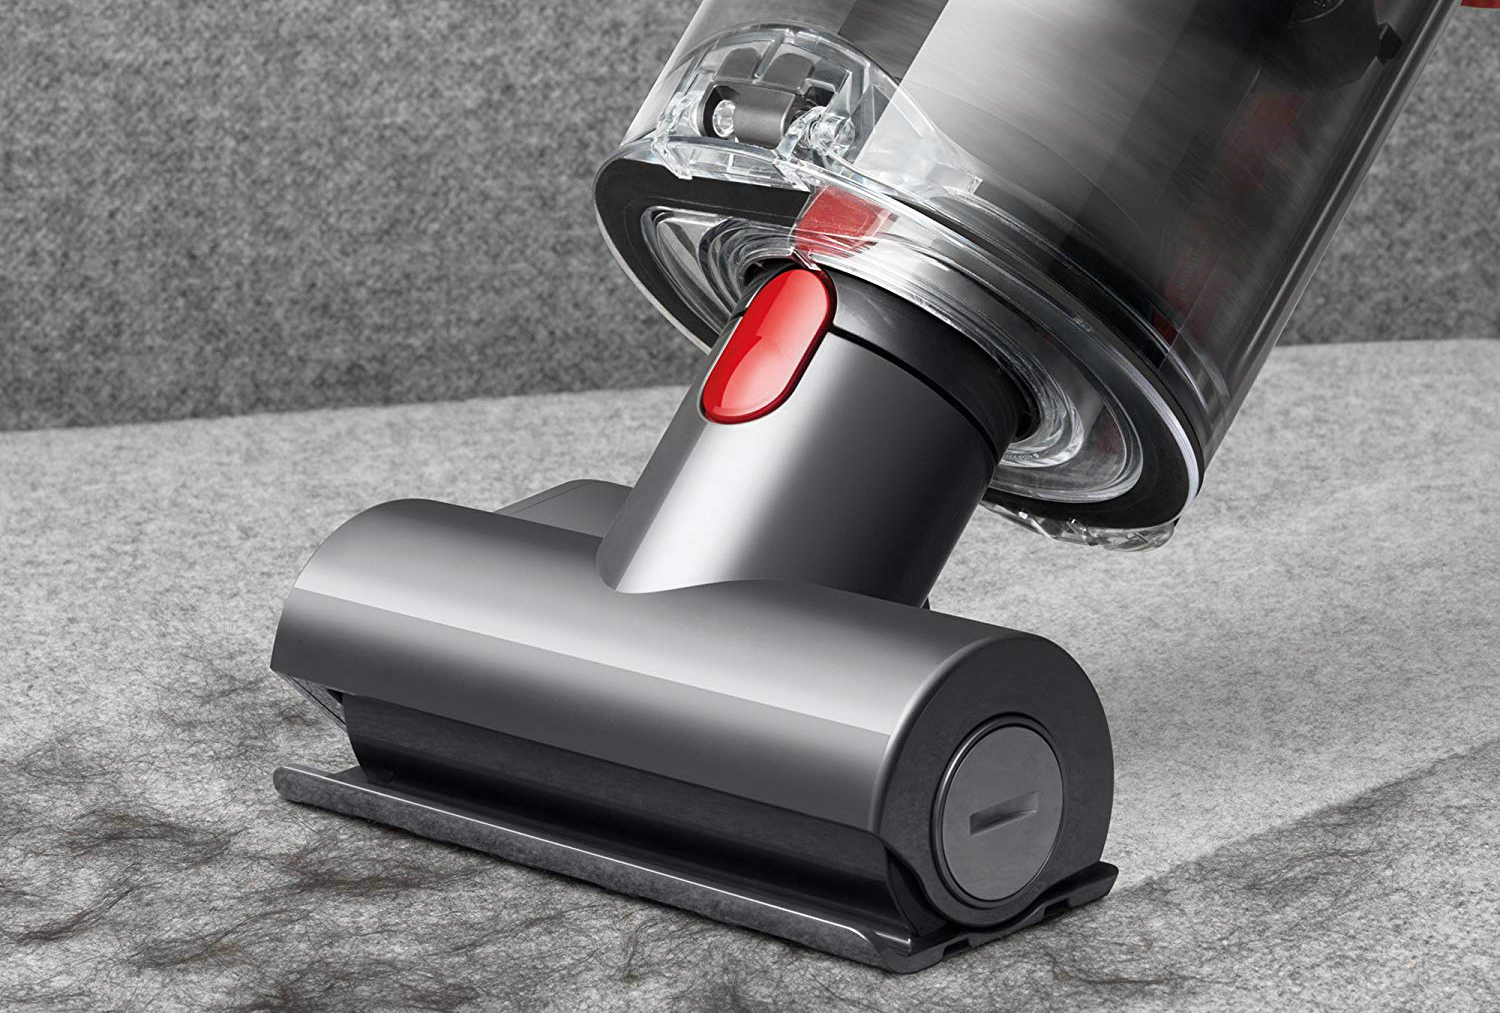 dyson vacuum cleaner deals on amazon cyclone v10 absolute lightweight cordless stick 8